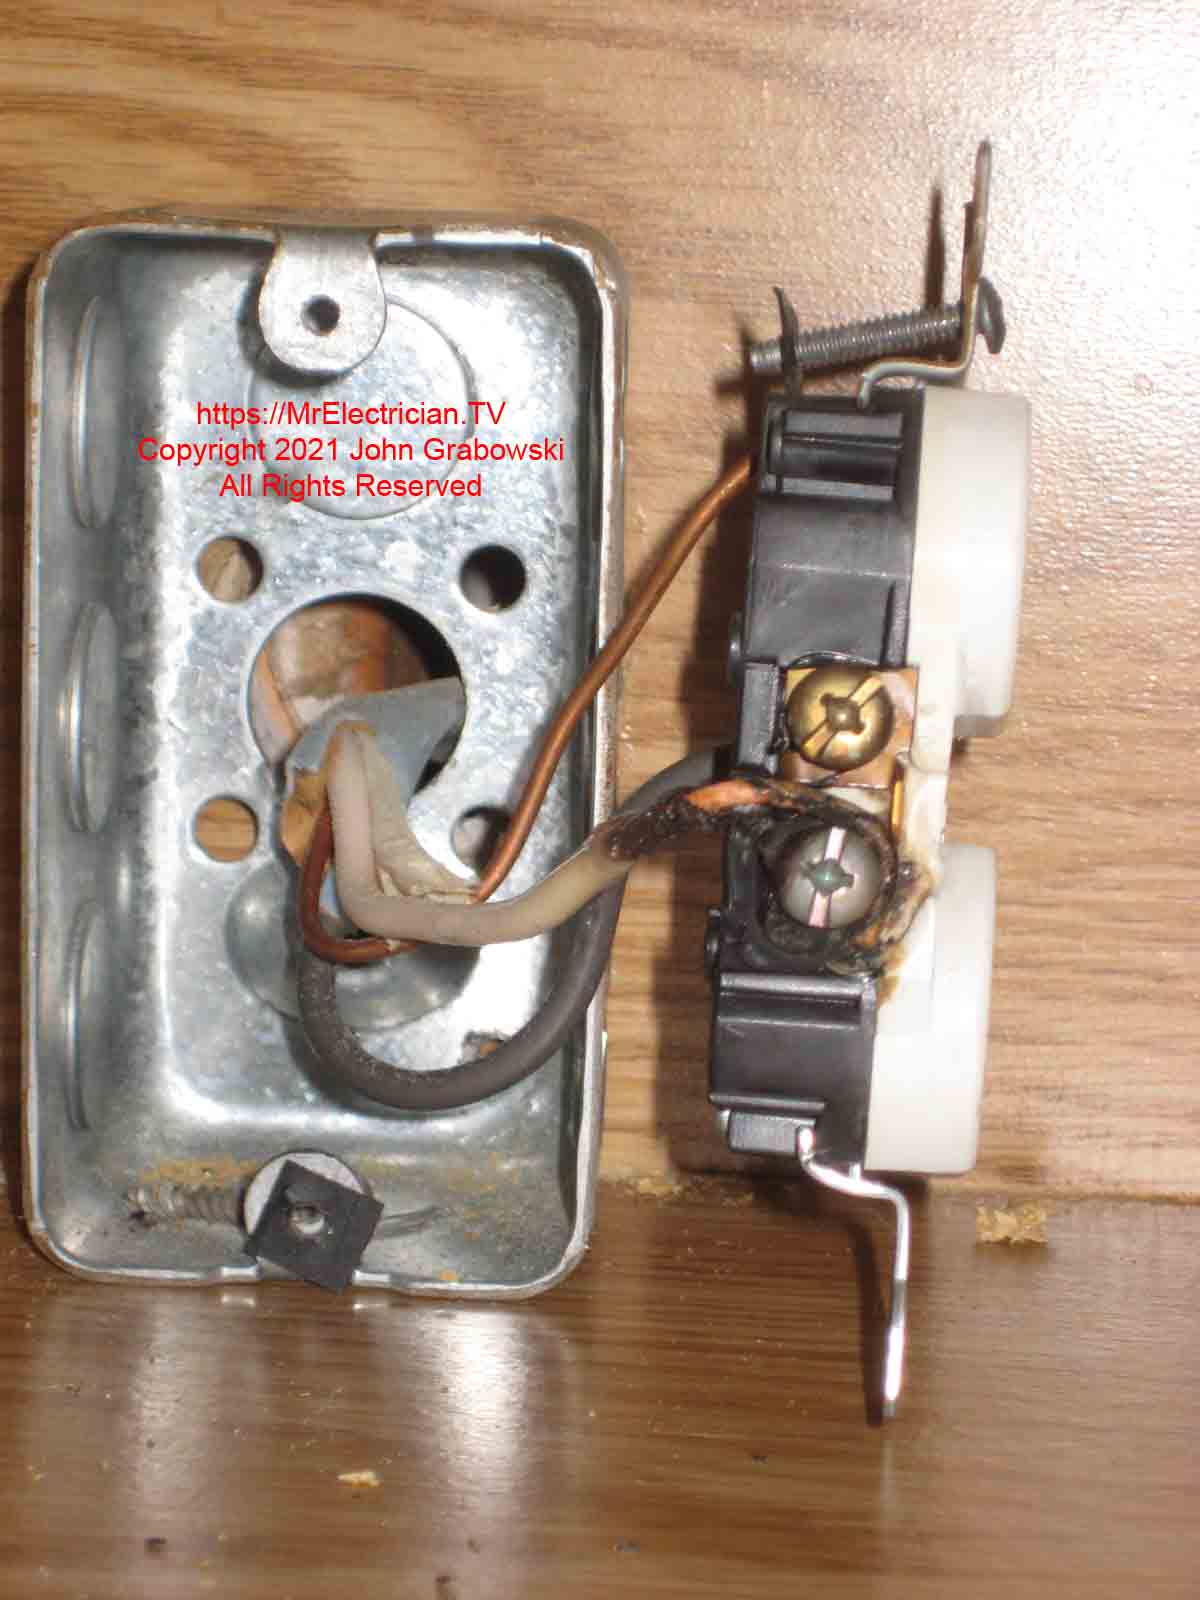 Burned wire on an electrical outlet